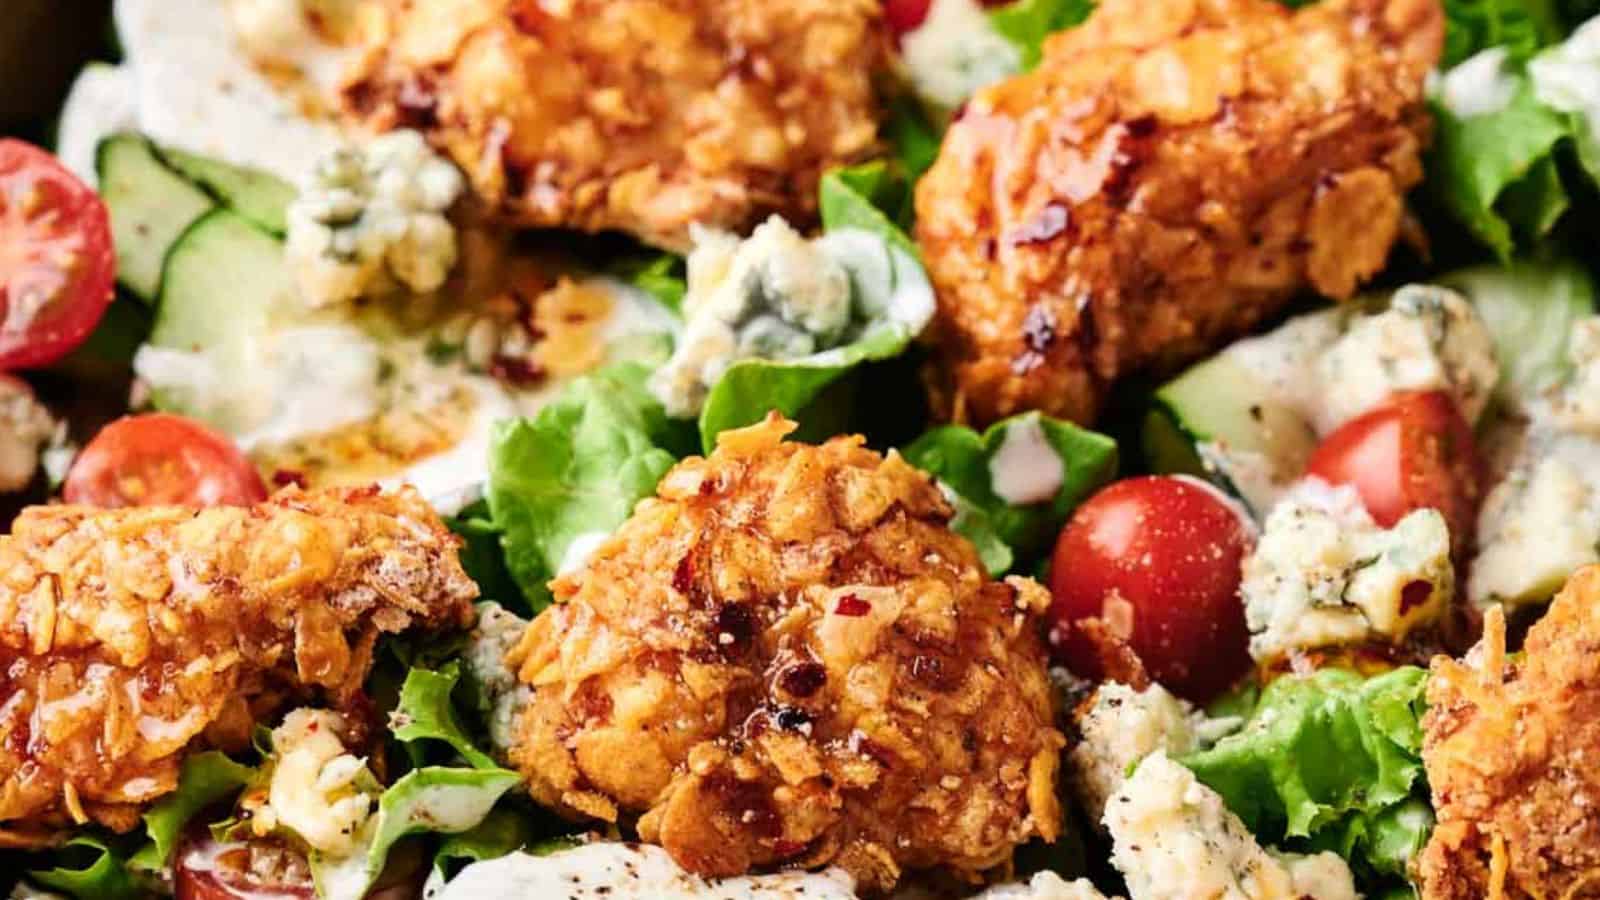 A honey hot chicken salad with succulent fried chicken pieces, cherry tomatoes, blue cheese crumbles, cucumber slices, and mixed greens, all topped with a creamy dressing.